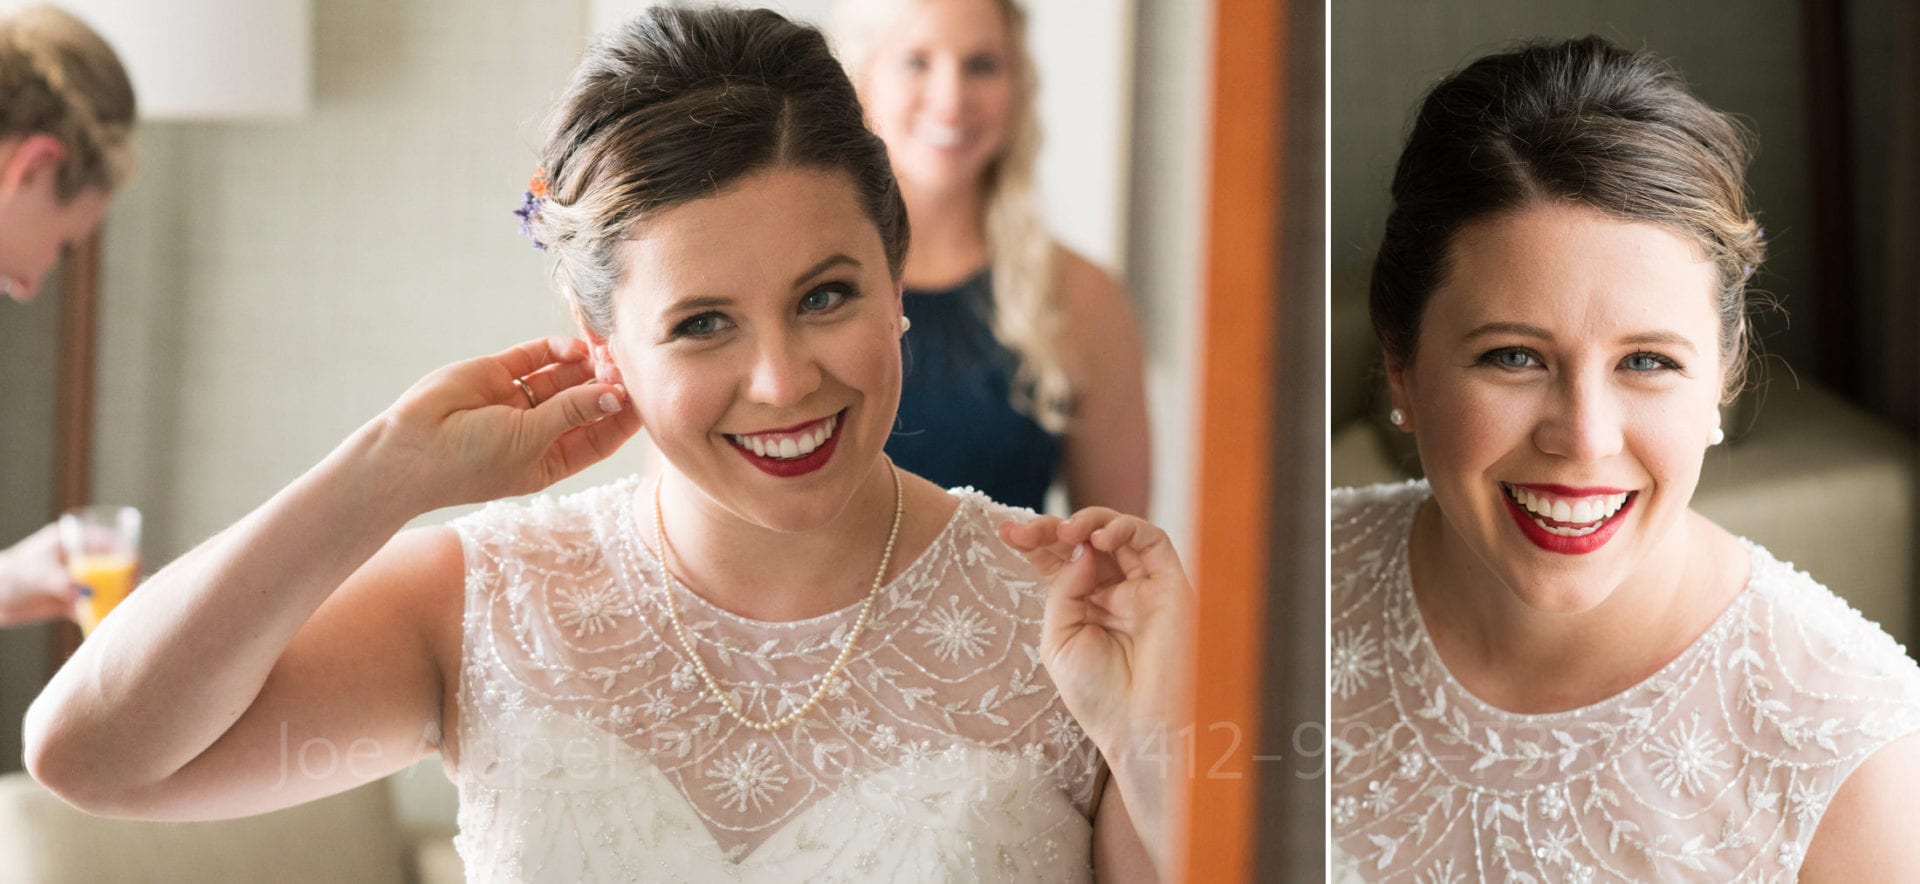 Two photos of a smiling bride wearing a white dress and pearls.